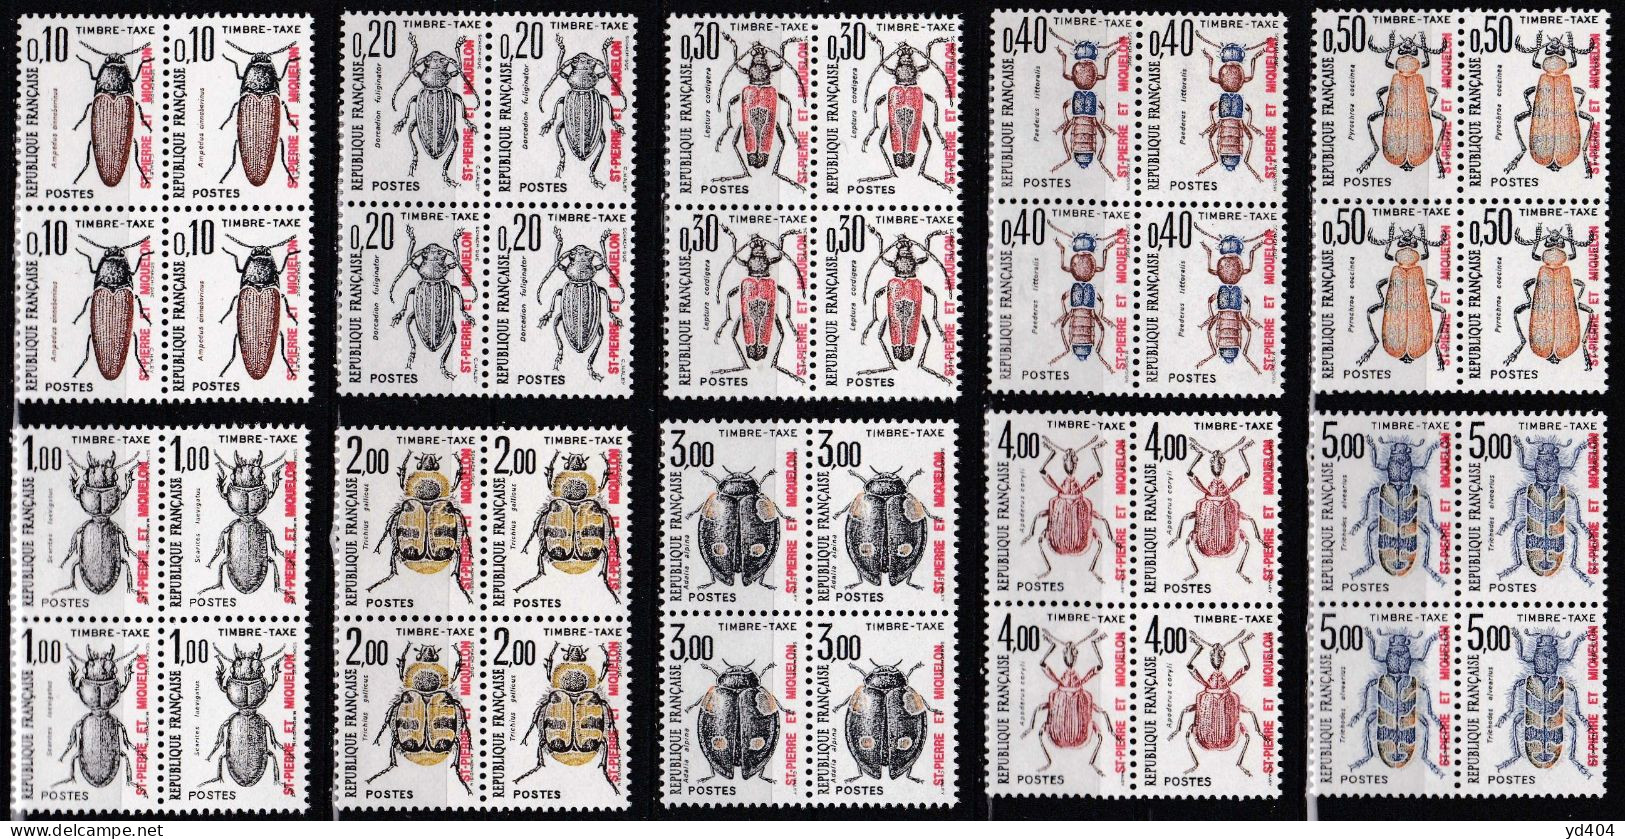 PM-660B – ST PIERRE & MIQUELON – POSTAGE DUE - 1986 – INSECTS – SG # D569/78(x4) MNH 106 € - Strafport